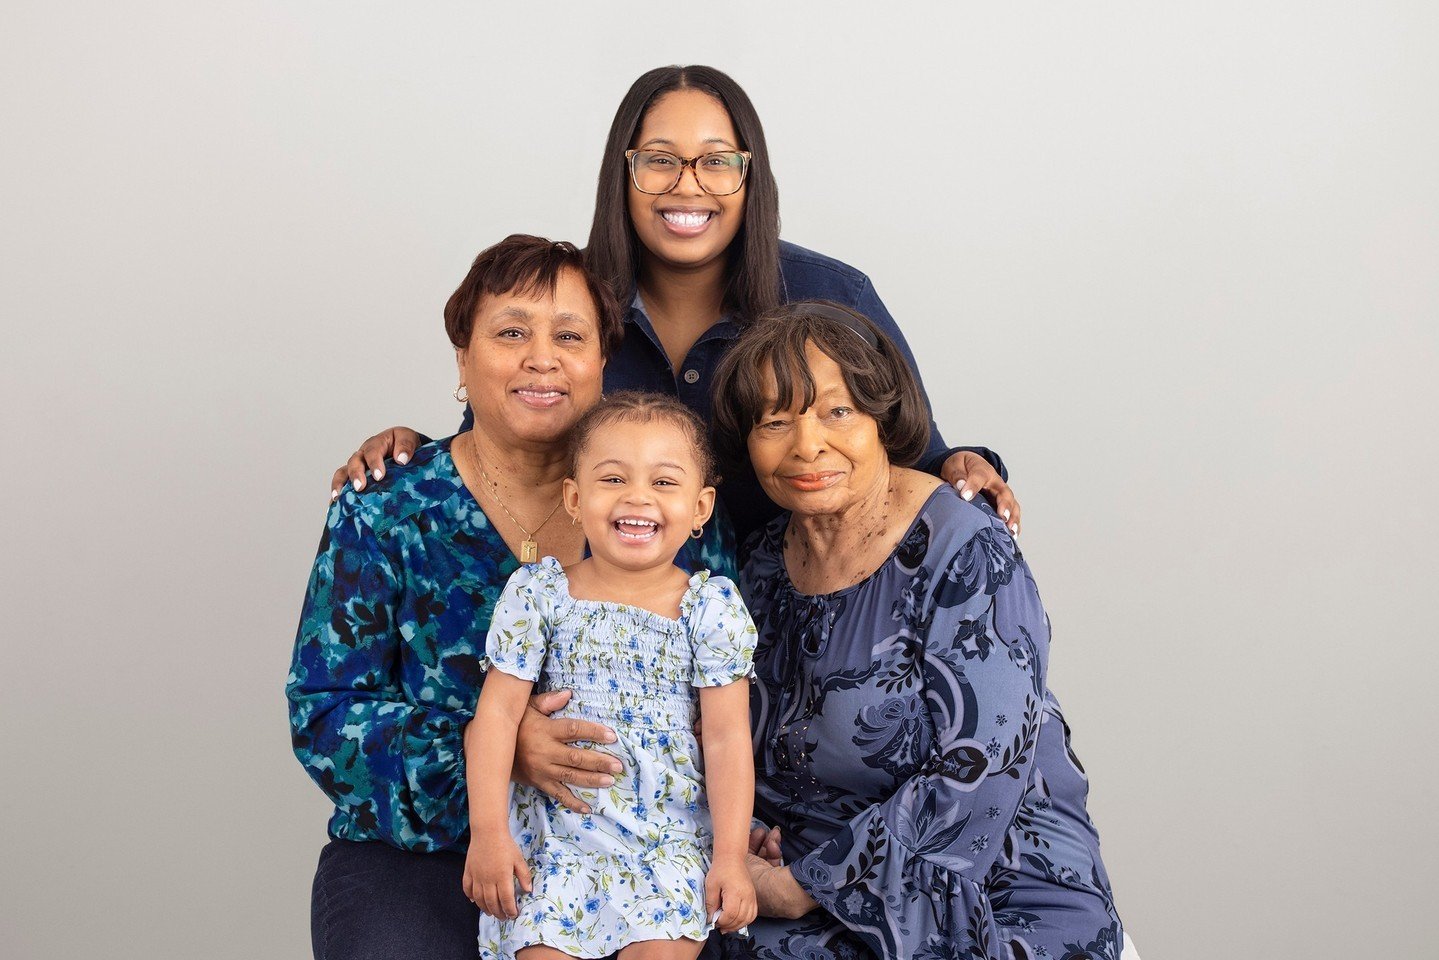 With each passing generation, love grows stronger. We loved photographing this great grandma, grandma, mother, and daughter family. 
.
.
.
#FamilyPortraitSession #FamilyPhotoSession  #SpringFun #NewbornPhotographers #MothersDay #FamilyPortraits #Newb